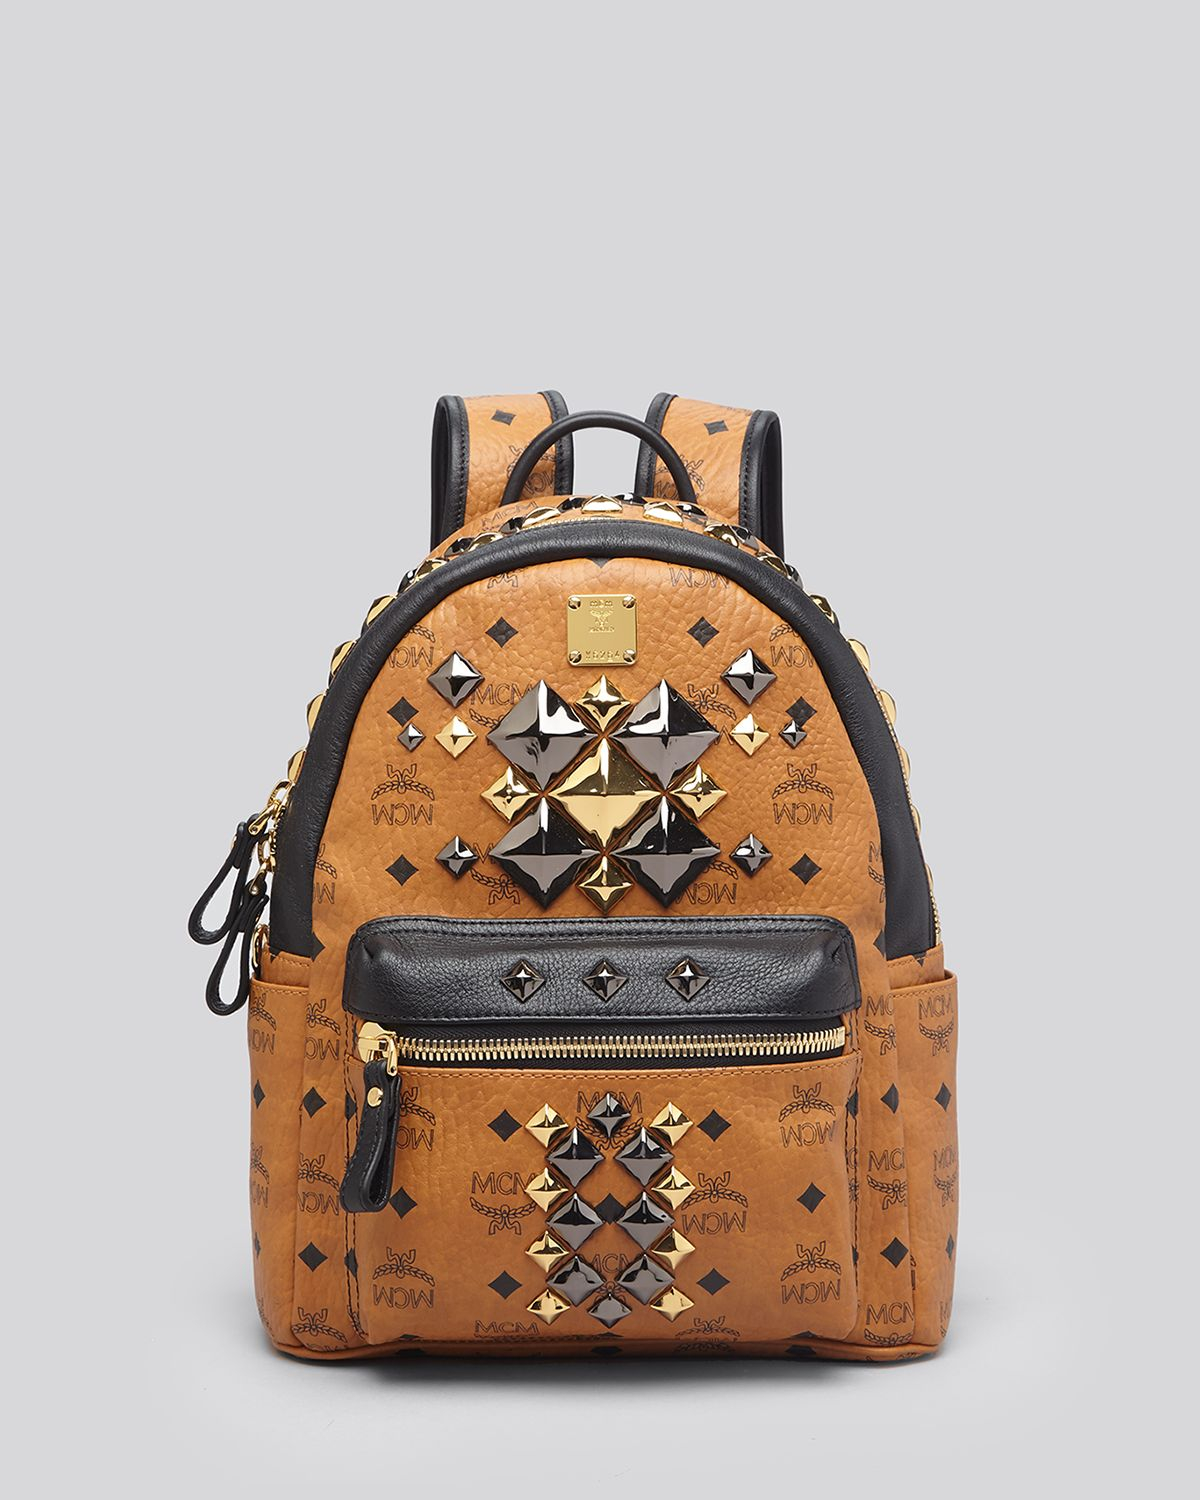 Lyst - Mcm Backpack - Small Stark Brock Colorblock Studded in Brown